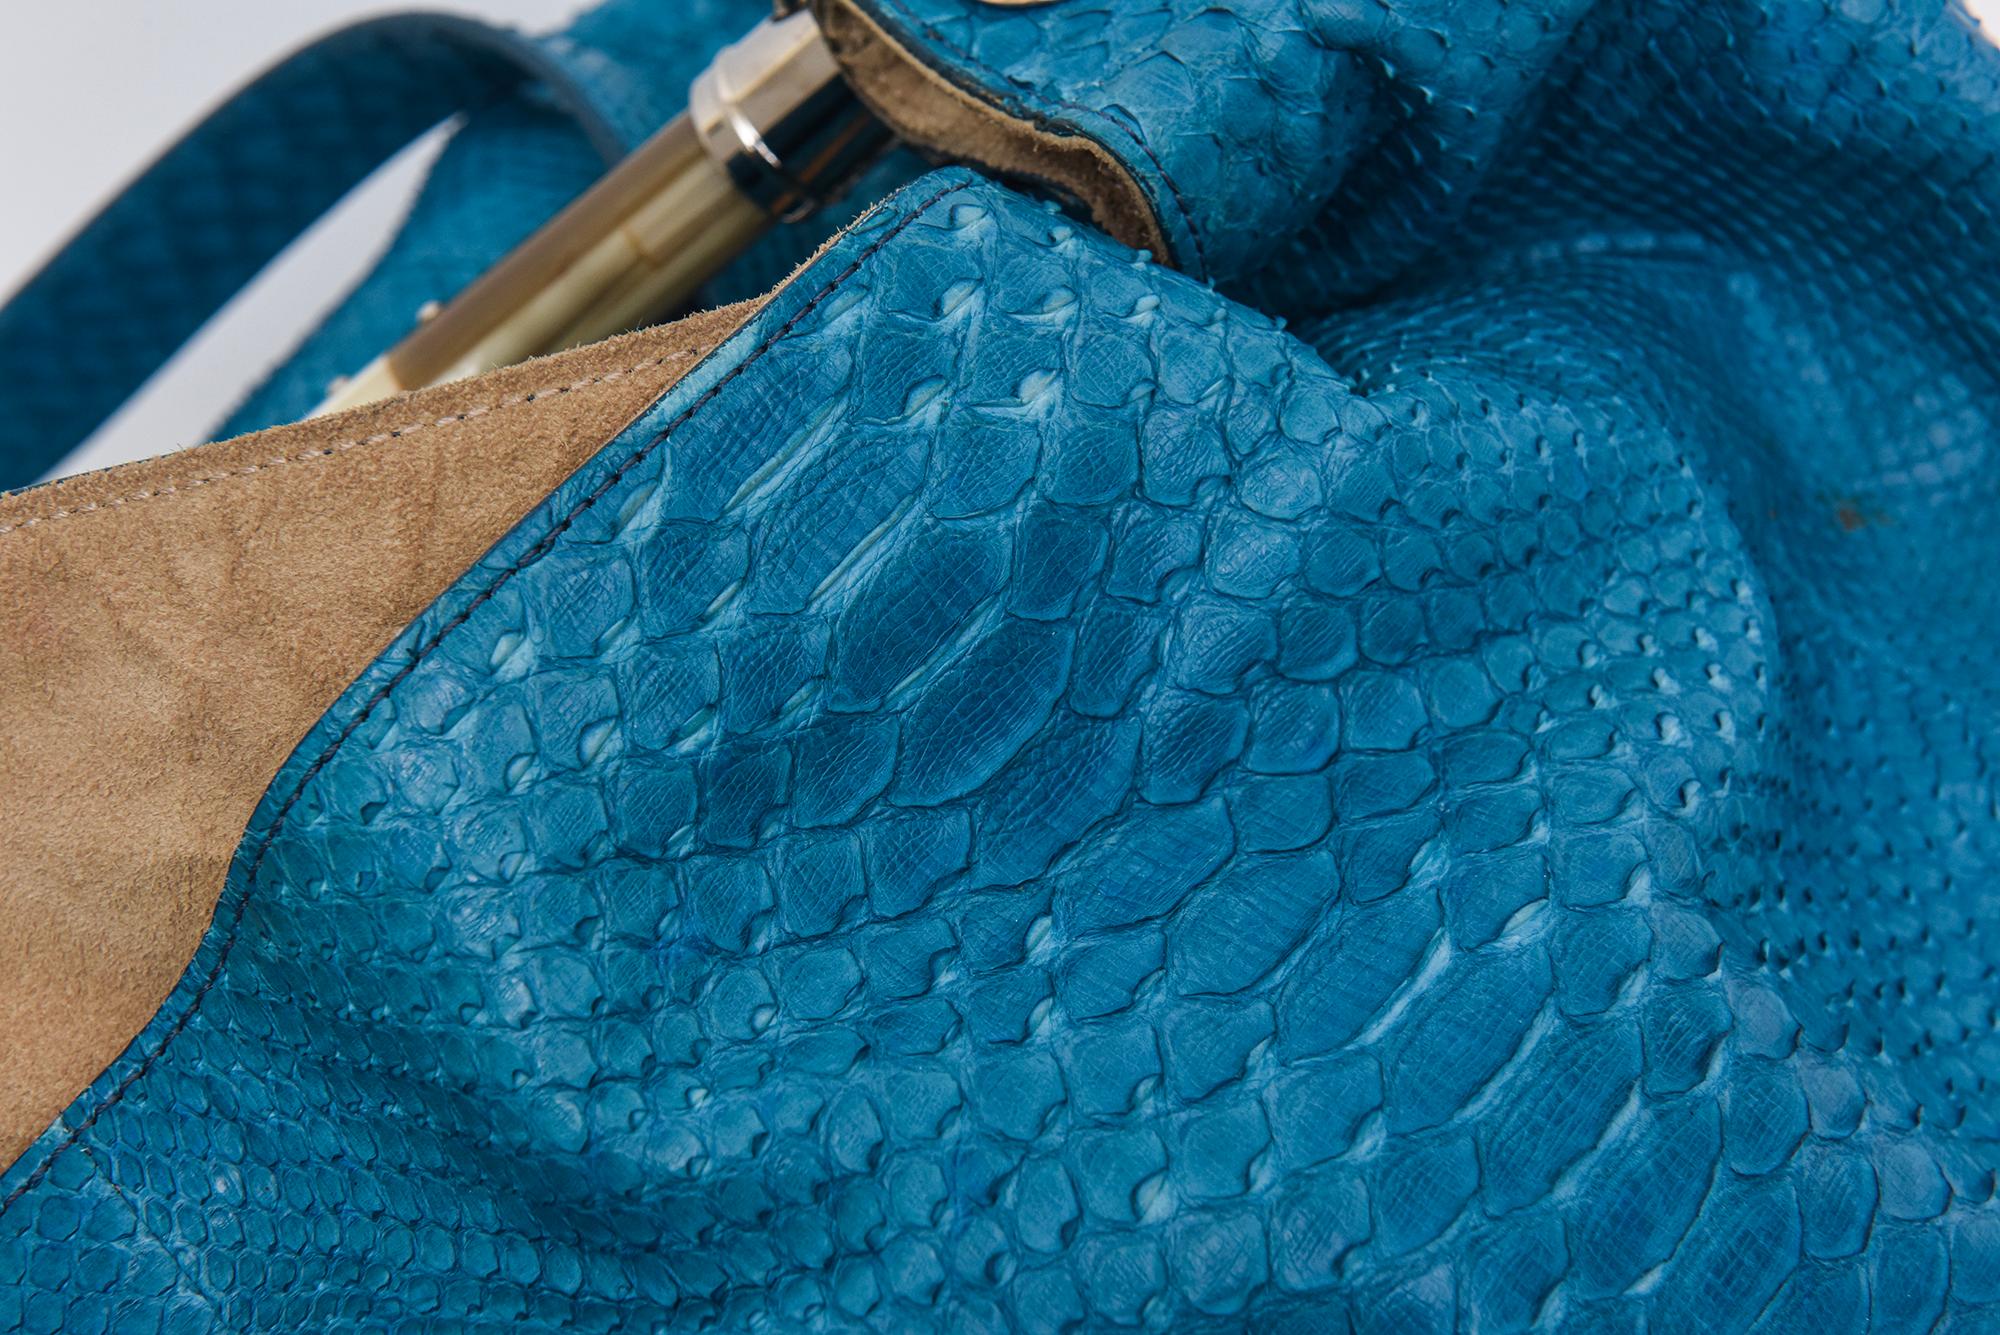 Ralph Lauren Turquoise Python Arm and Shoulder Bag With Bone LIke Top Handle For Sale 1